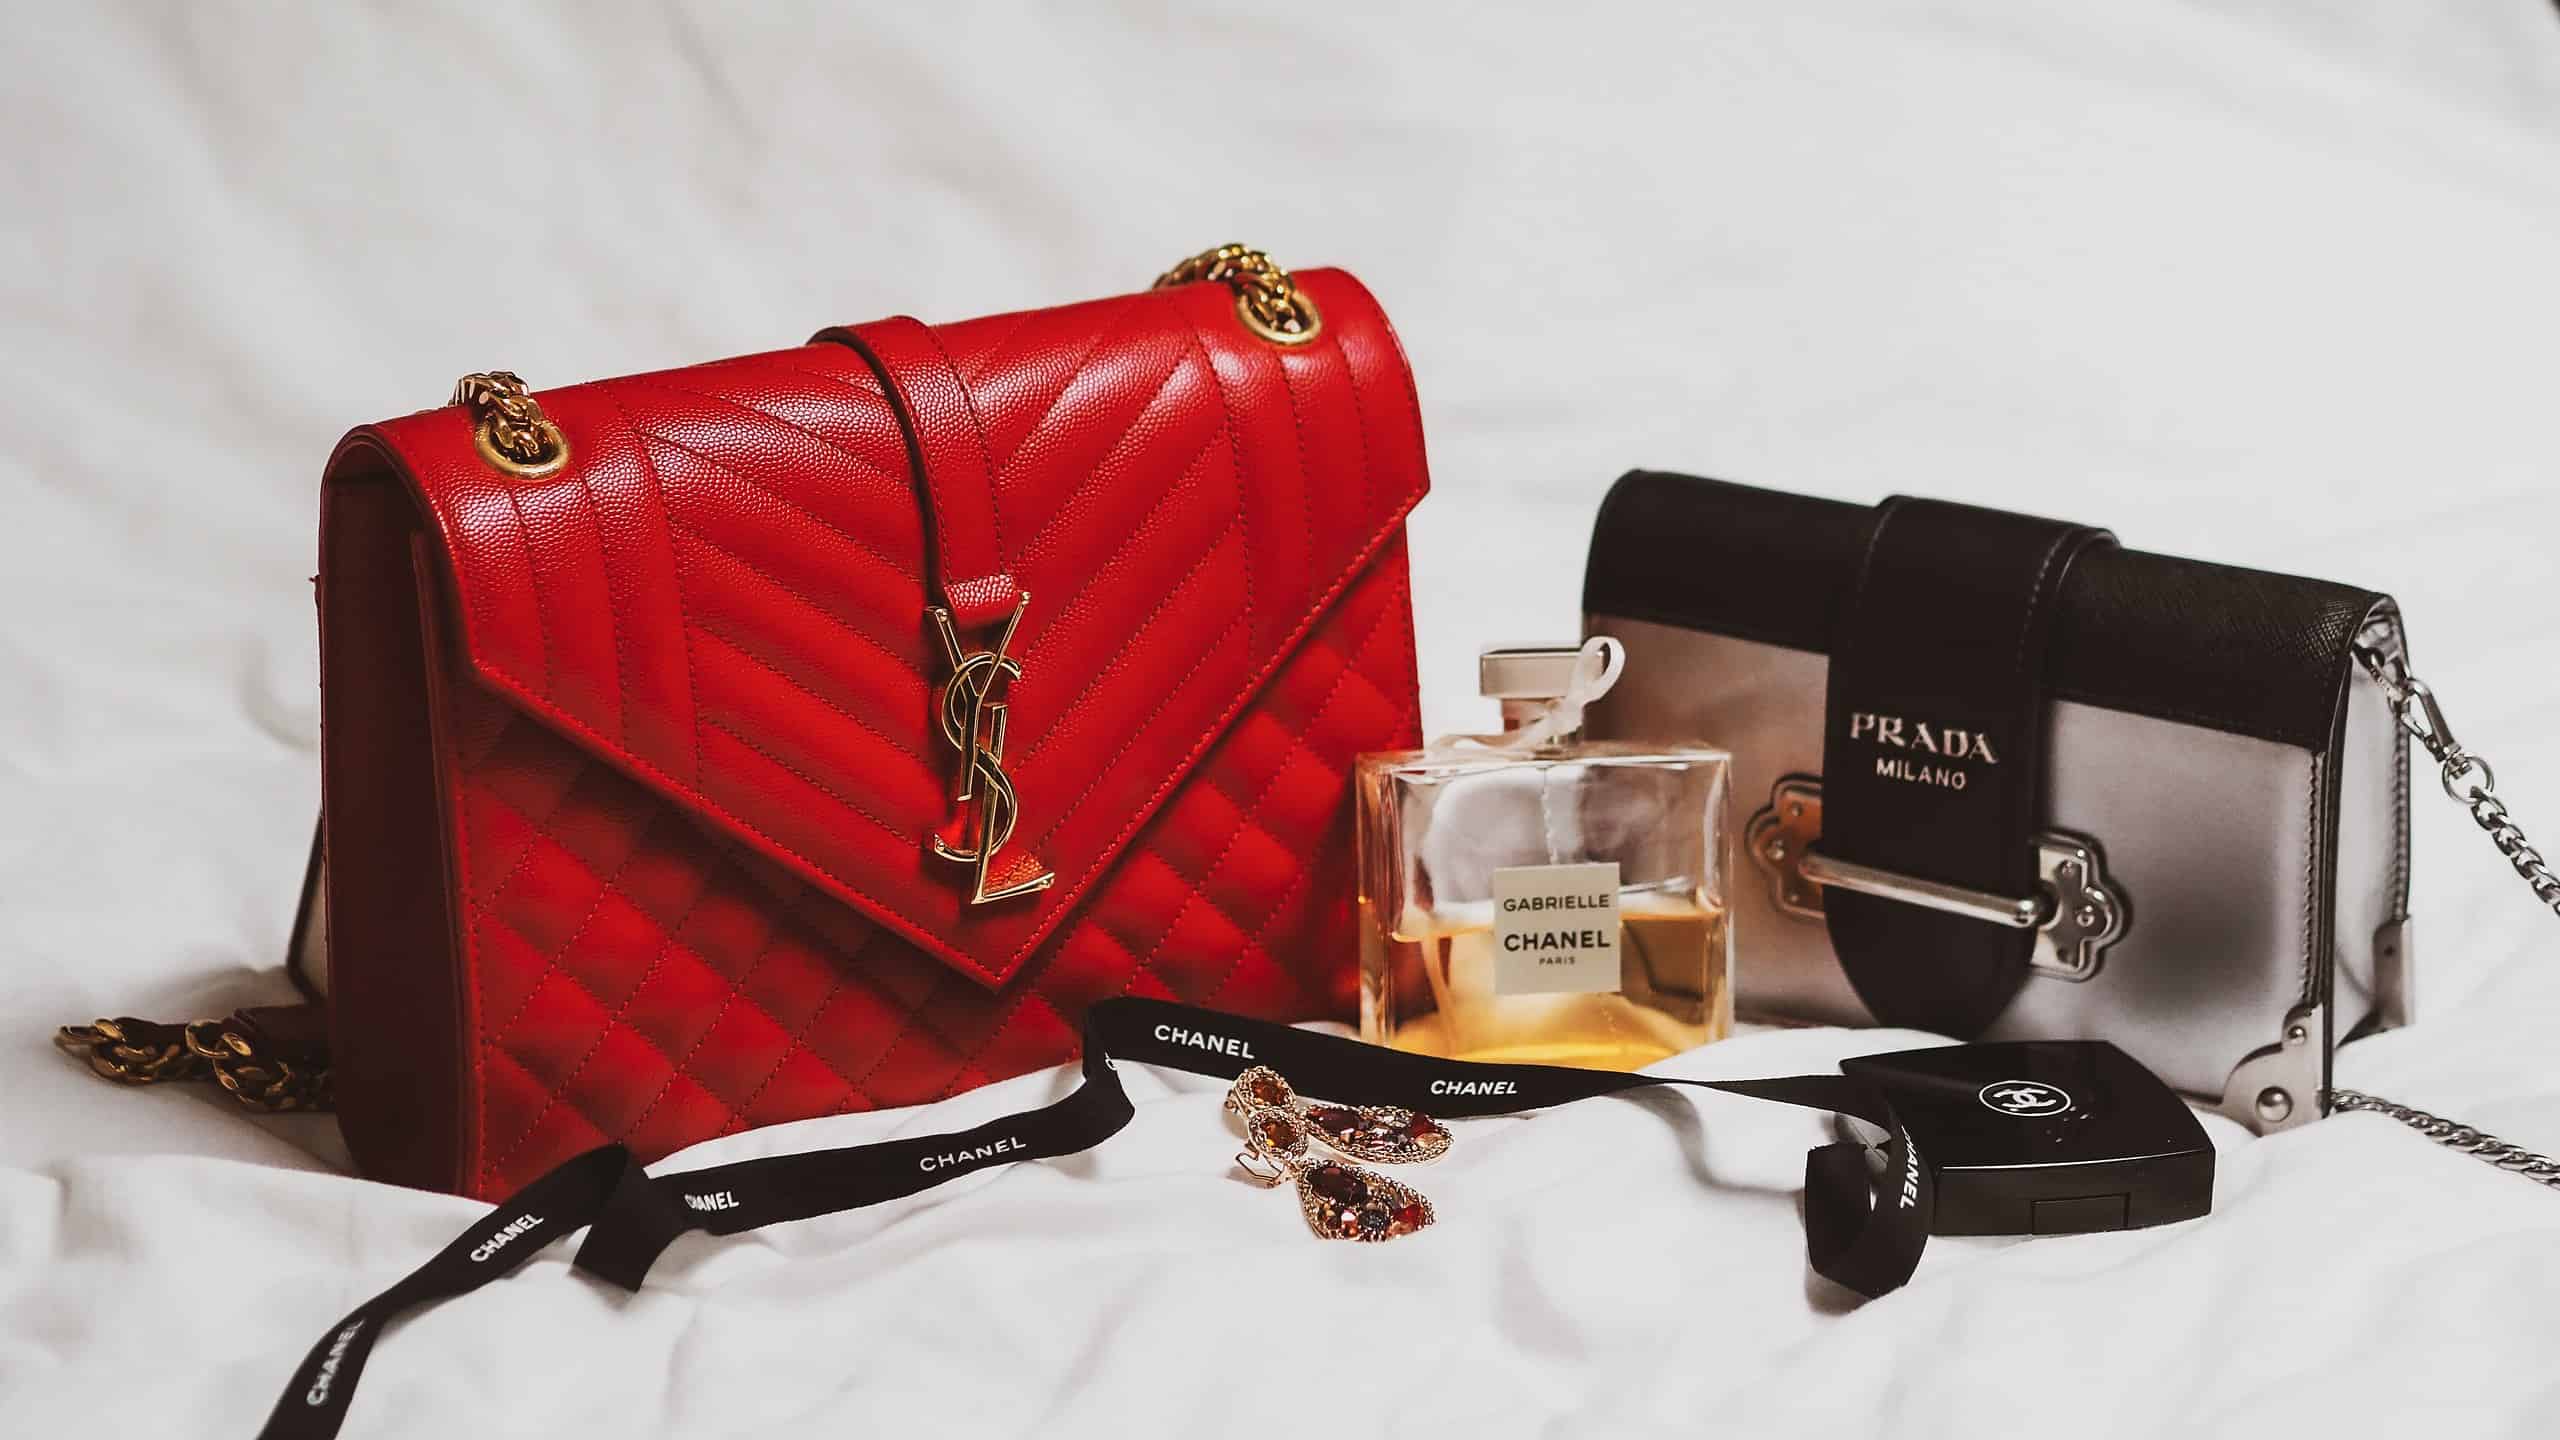 What Luxury bags hold their value?